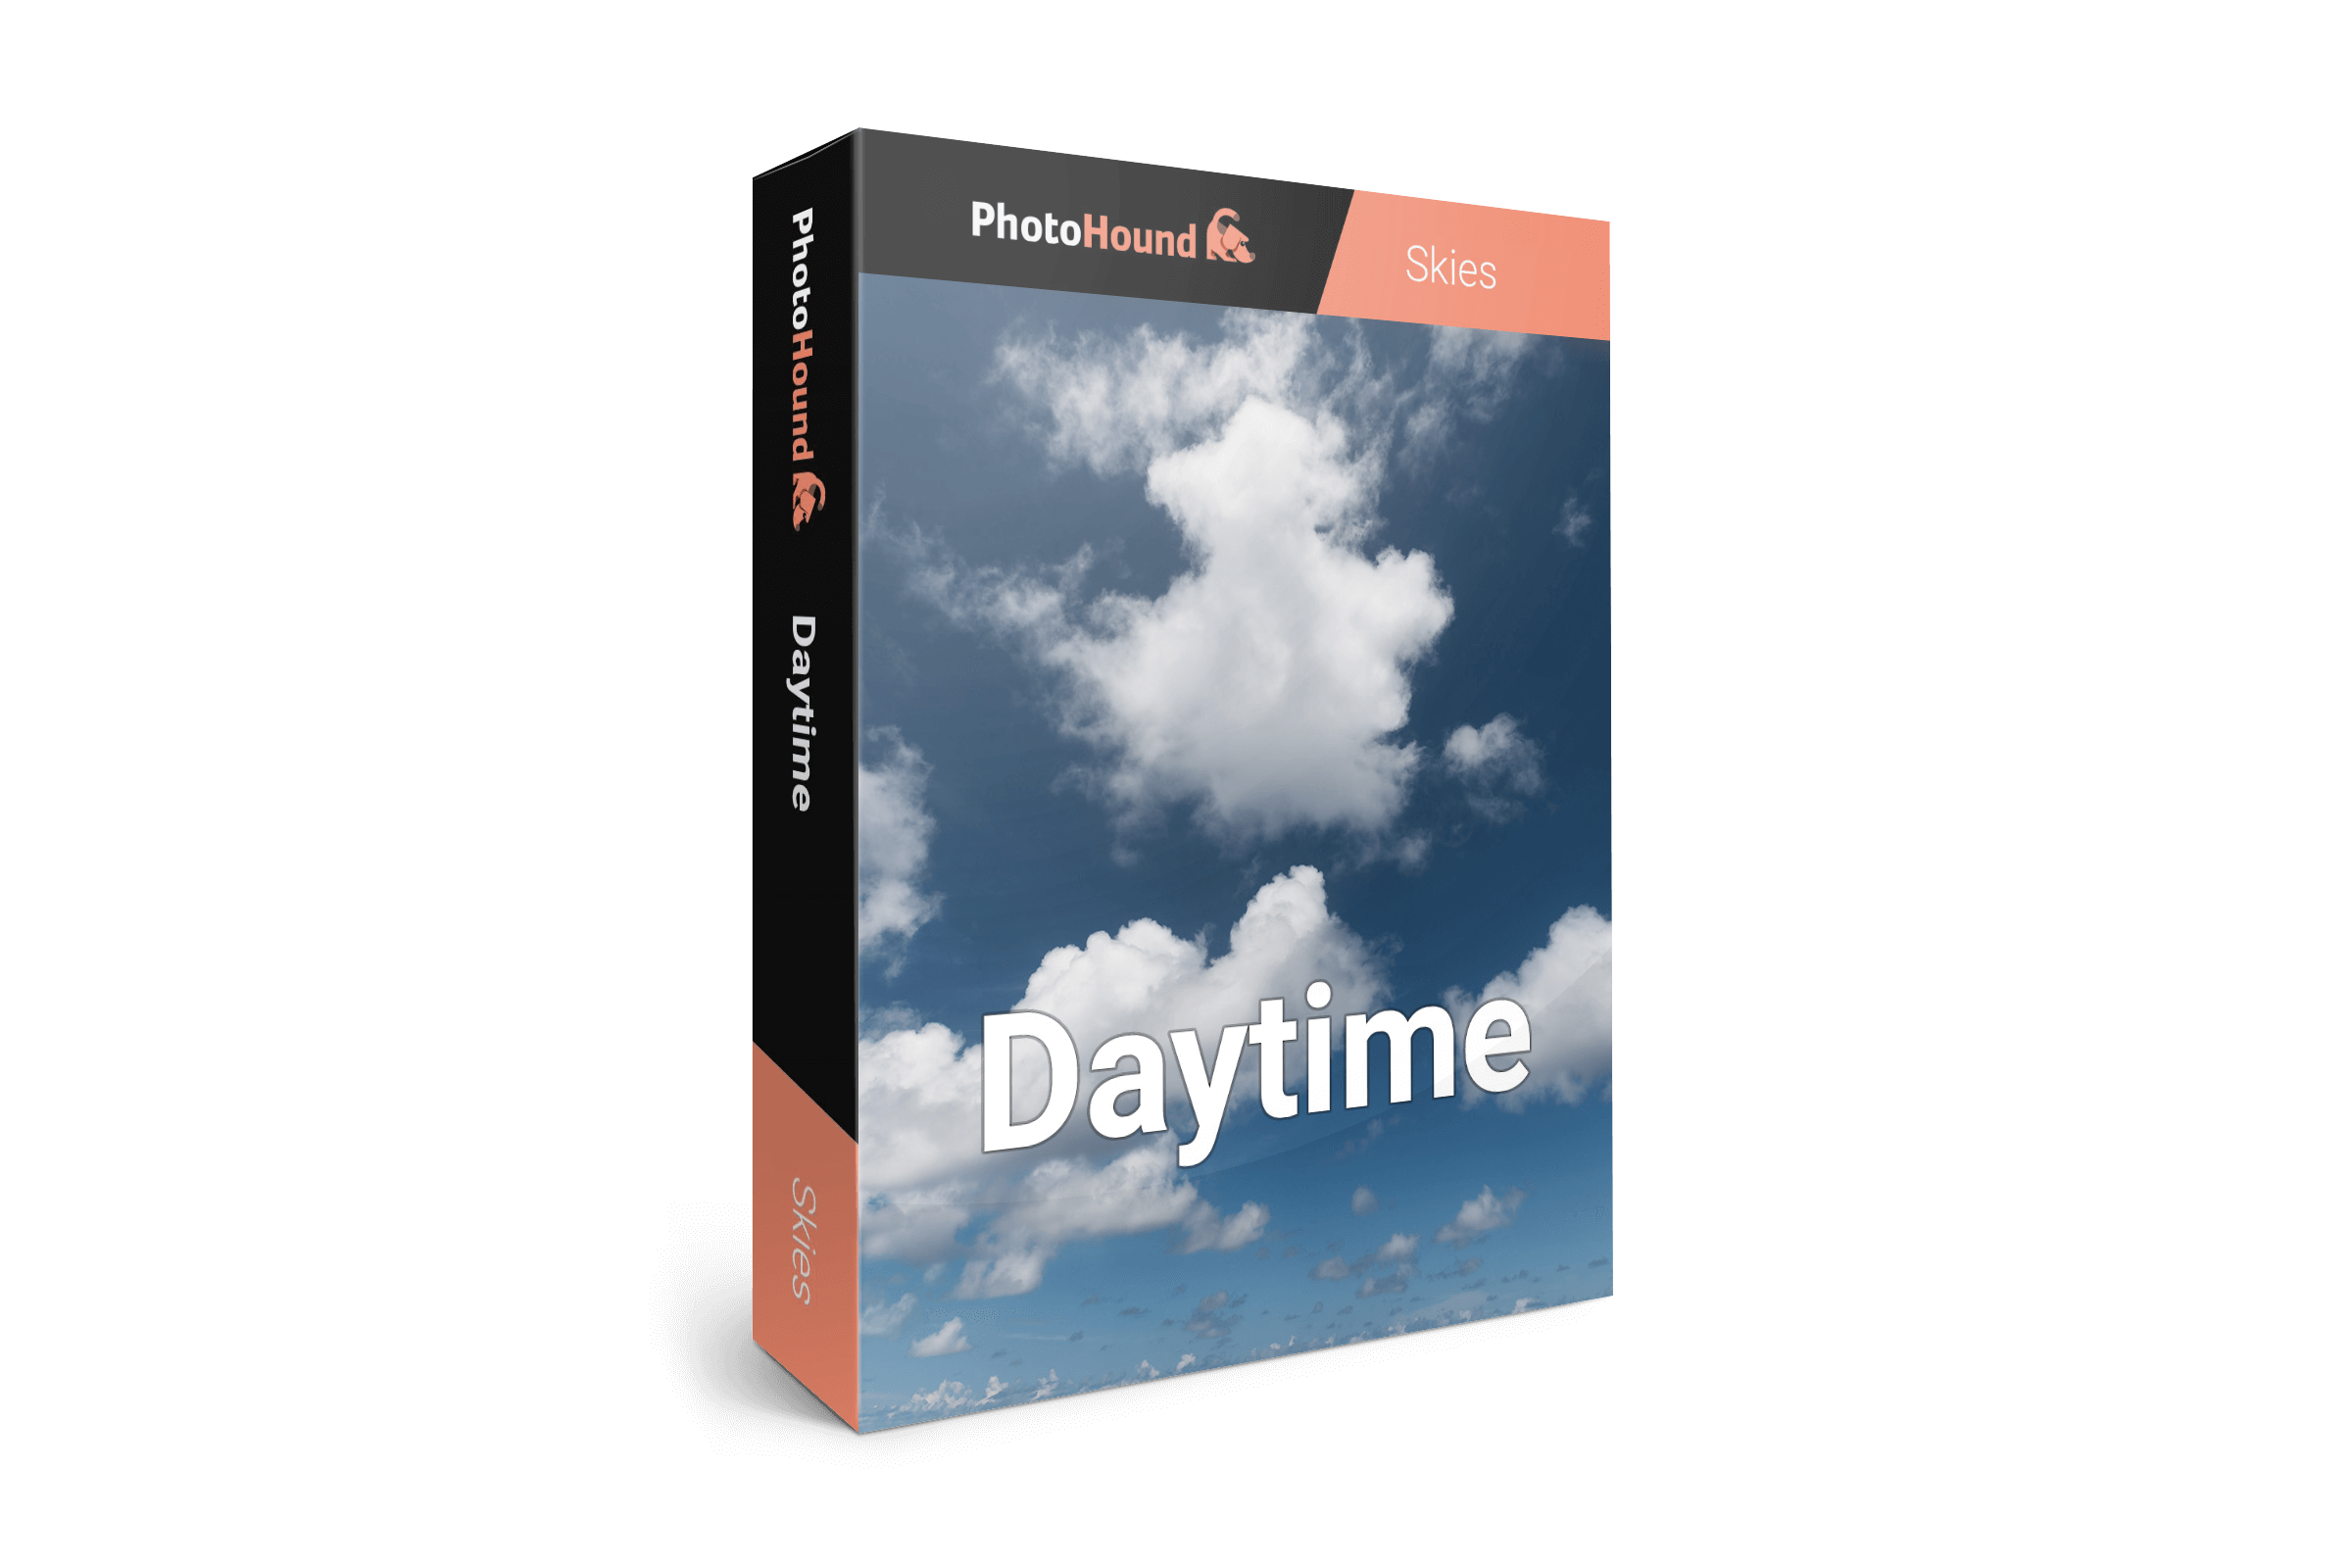 Free sky replacement images - daytime